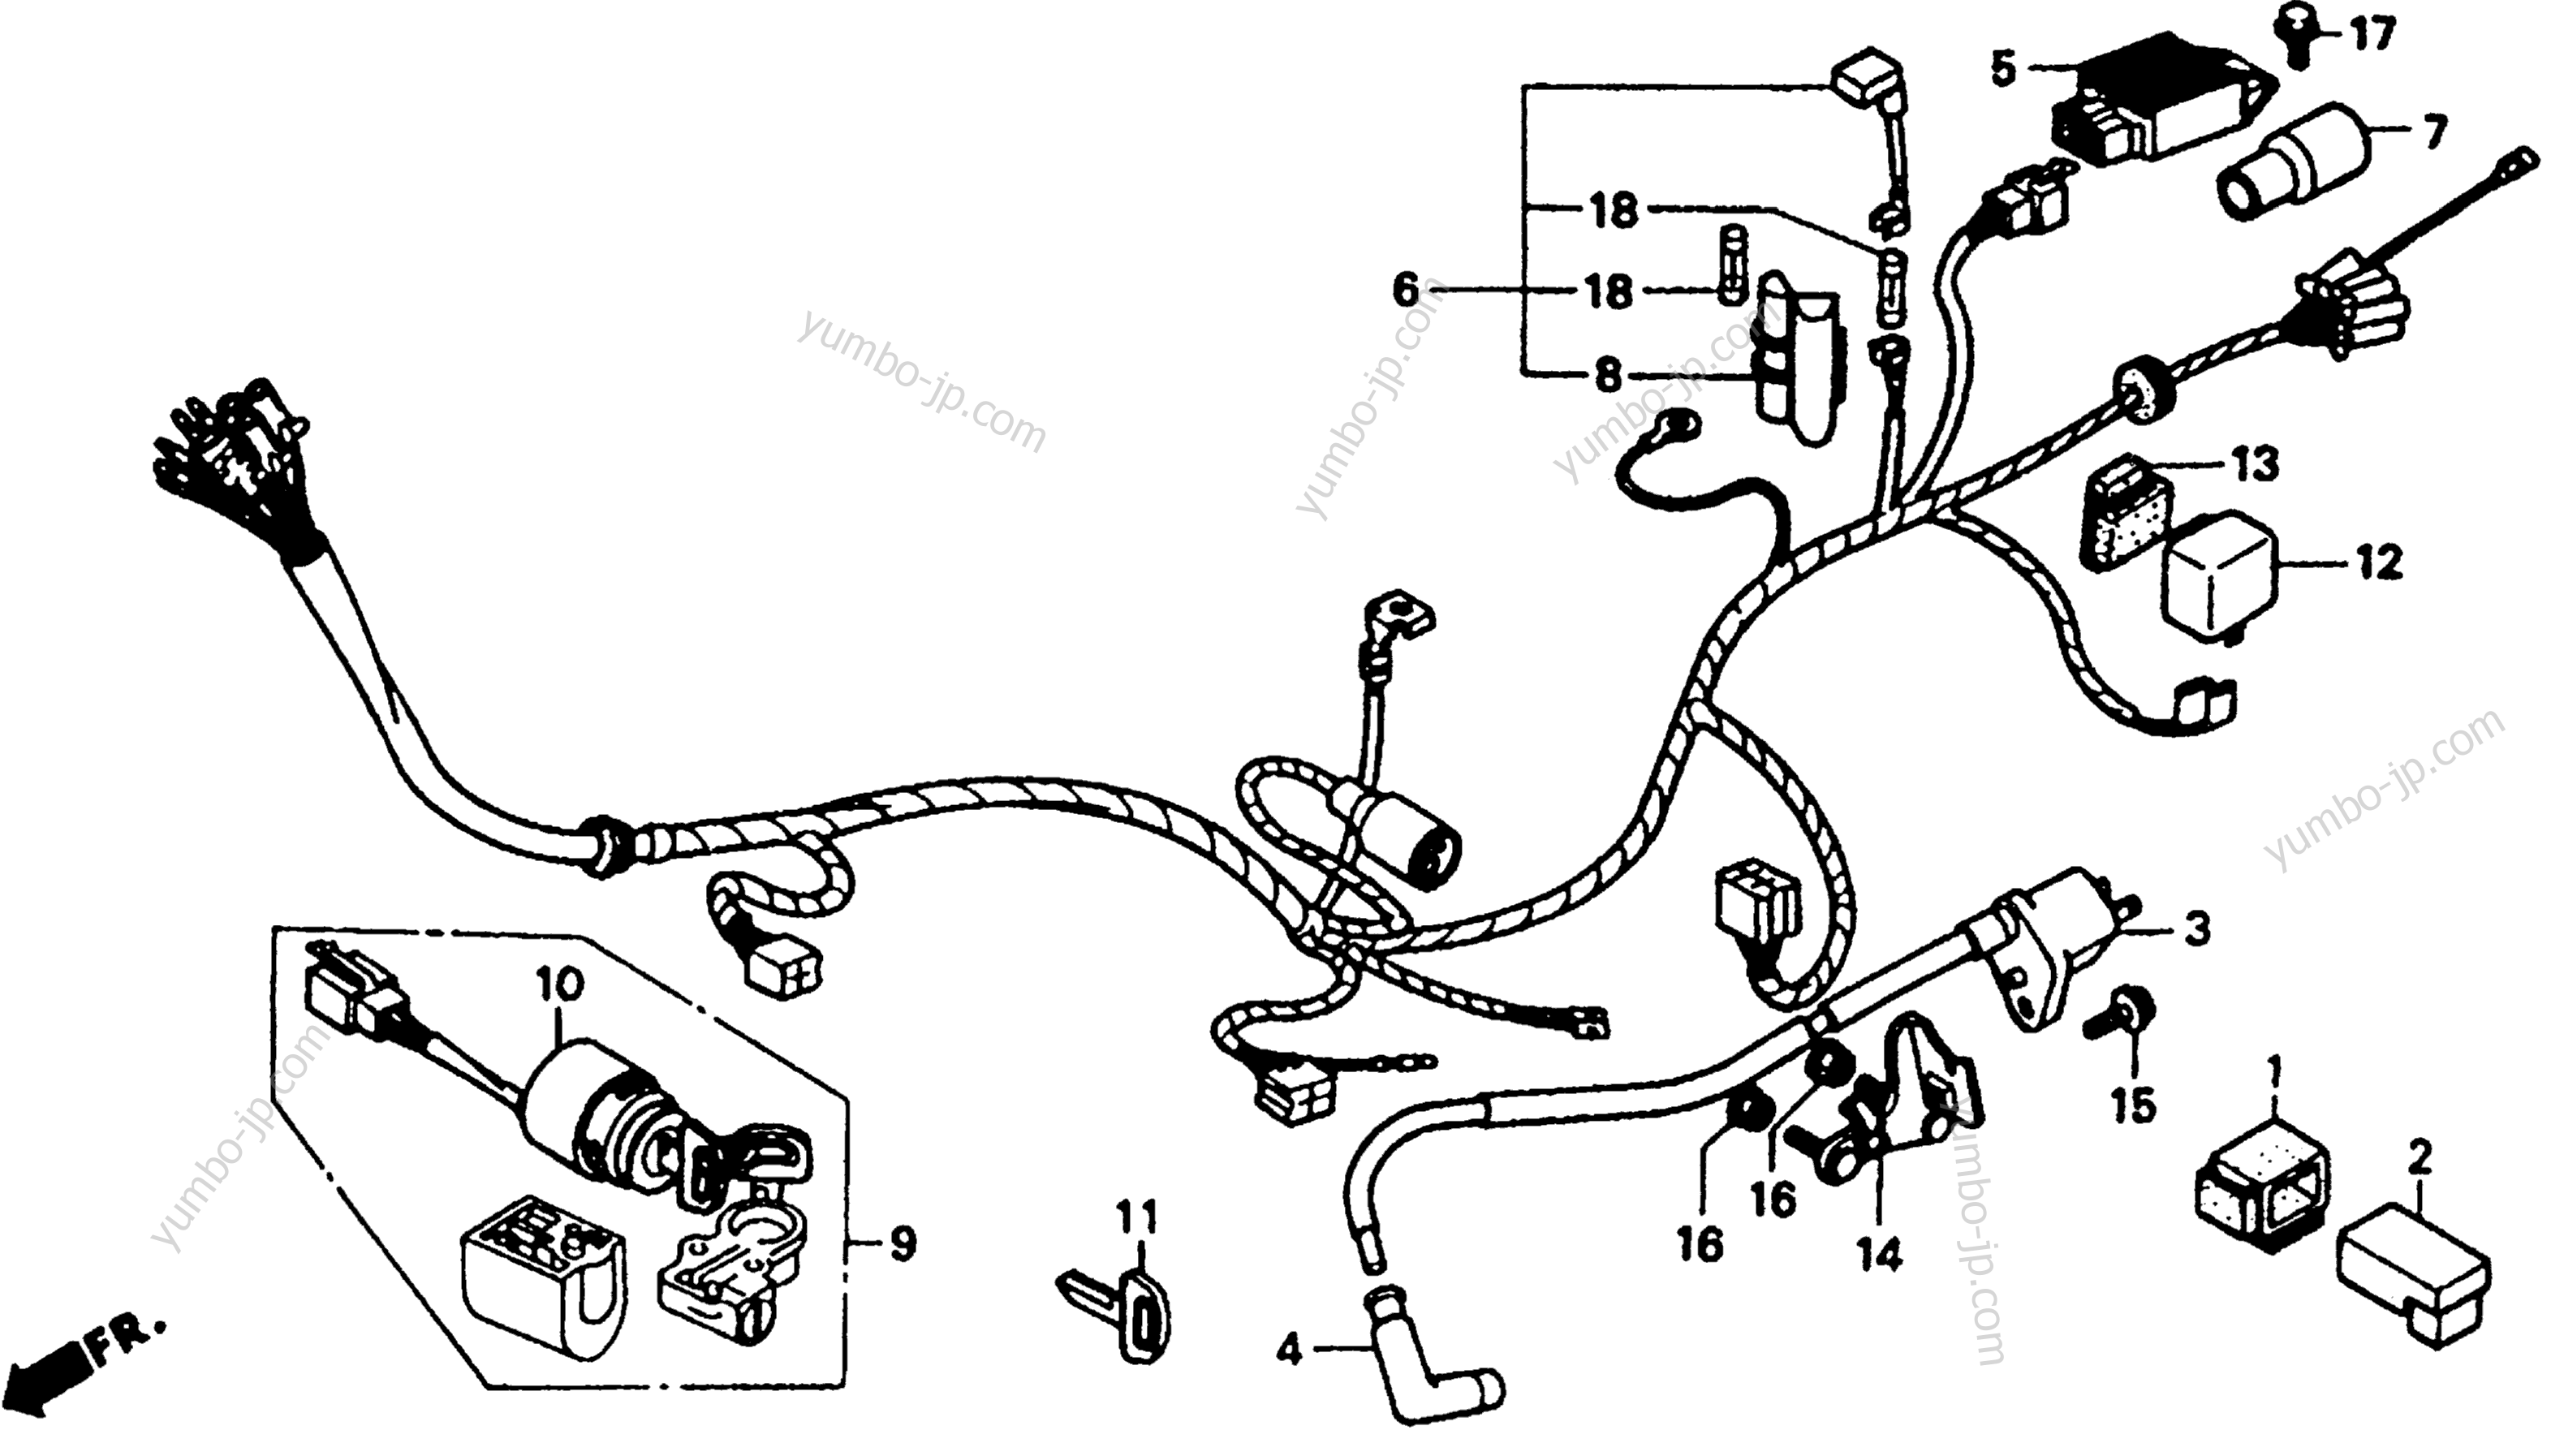 WIRE HARNESS for motorcycles HONDA CT70 AC 1991 year